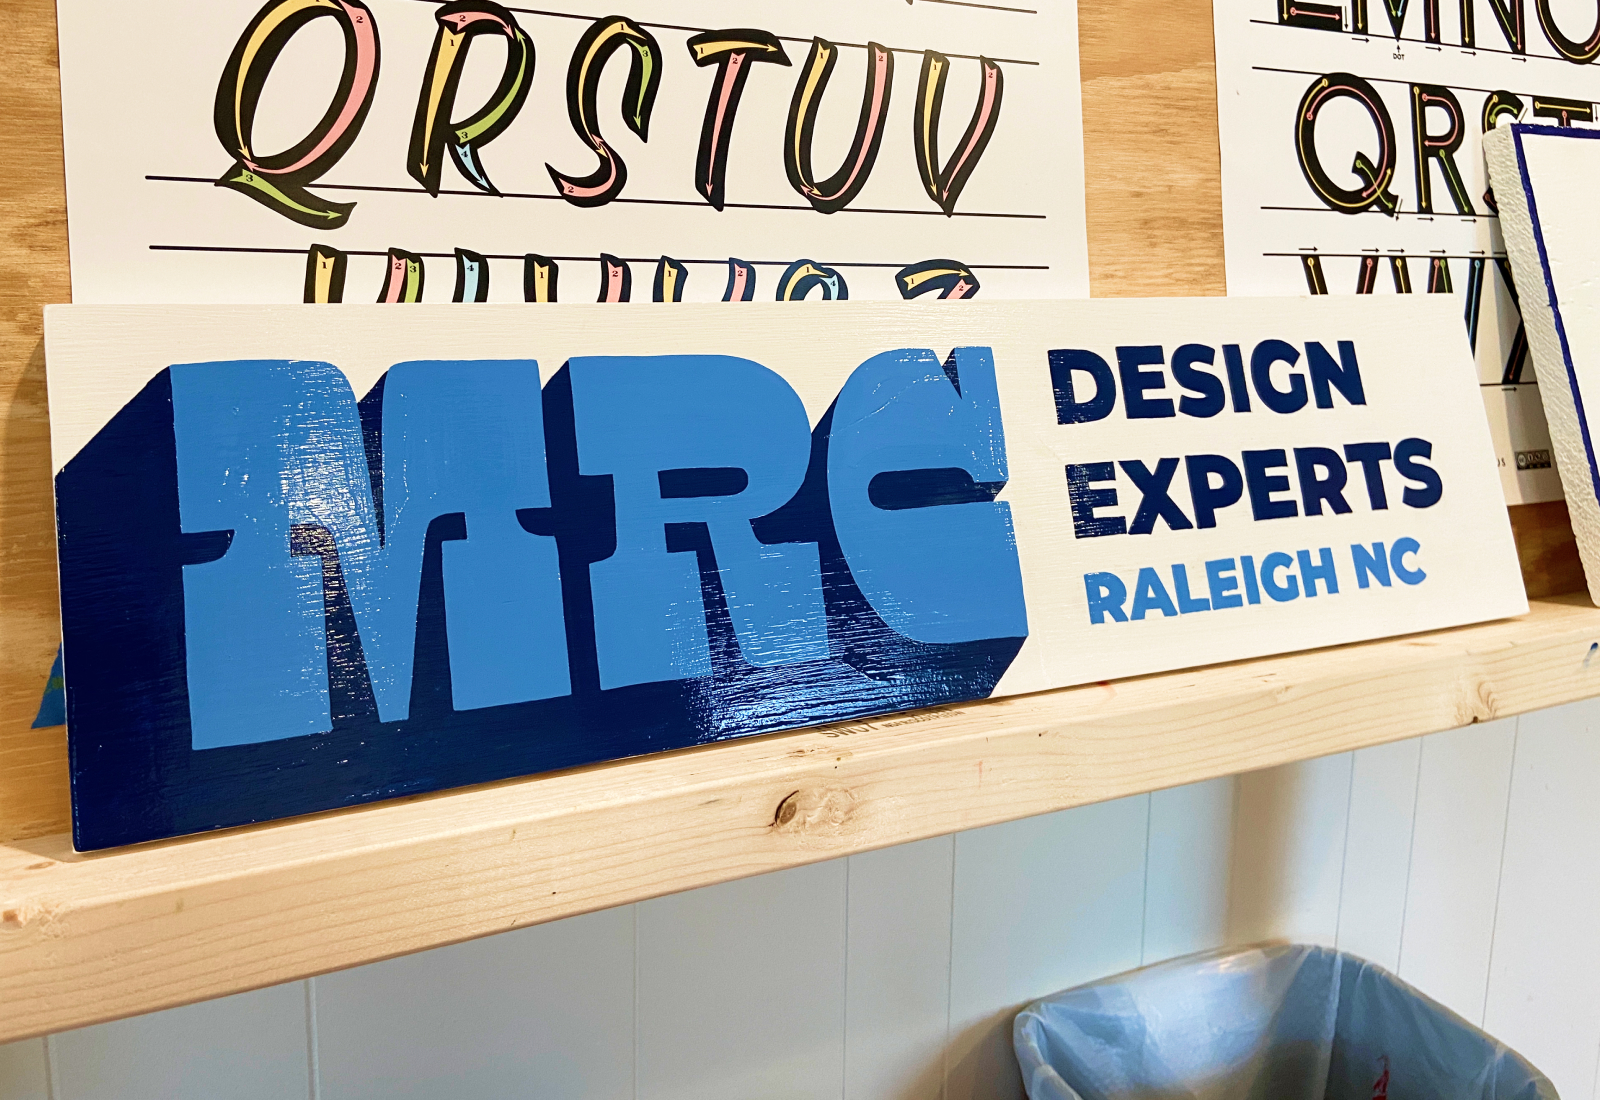 MRC Design Experts Sign | Hand Painted Sign by Joey Carty